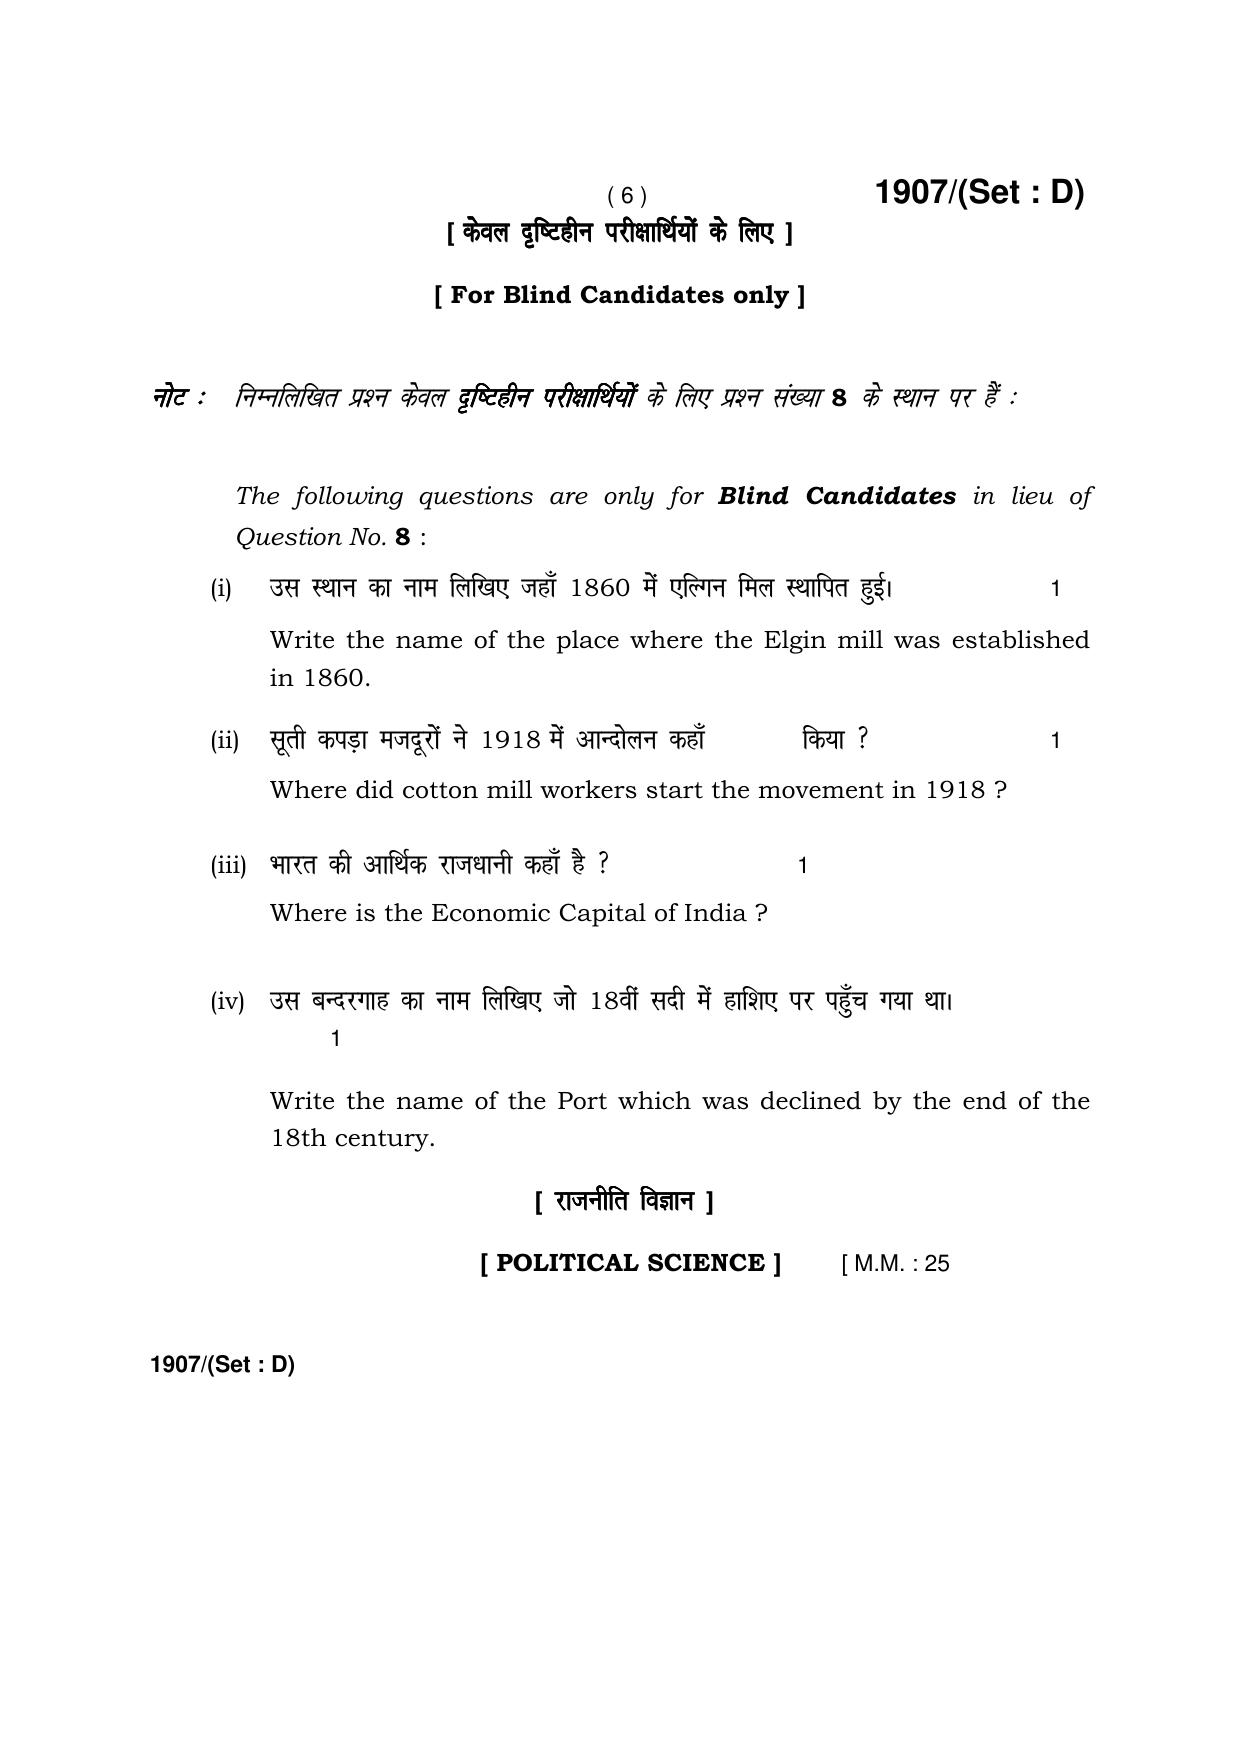 Haryana Board HBSE Class 10 Social Science -D 2017 Question Paper - Page 6